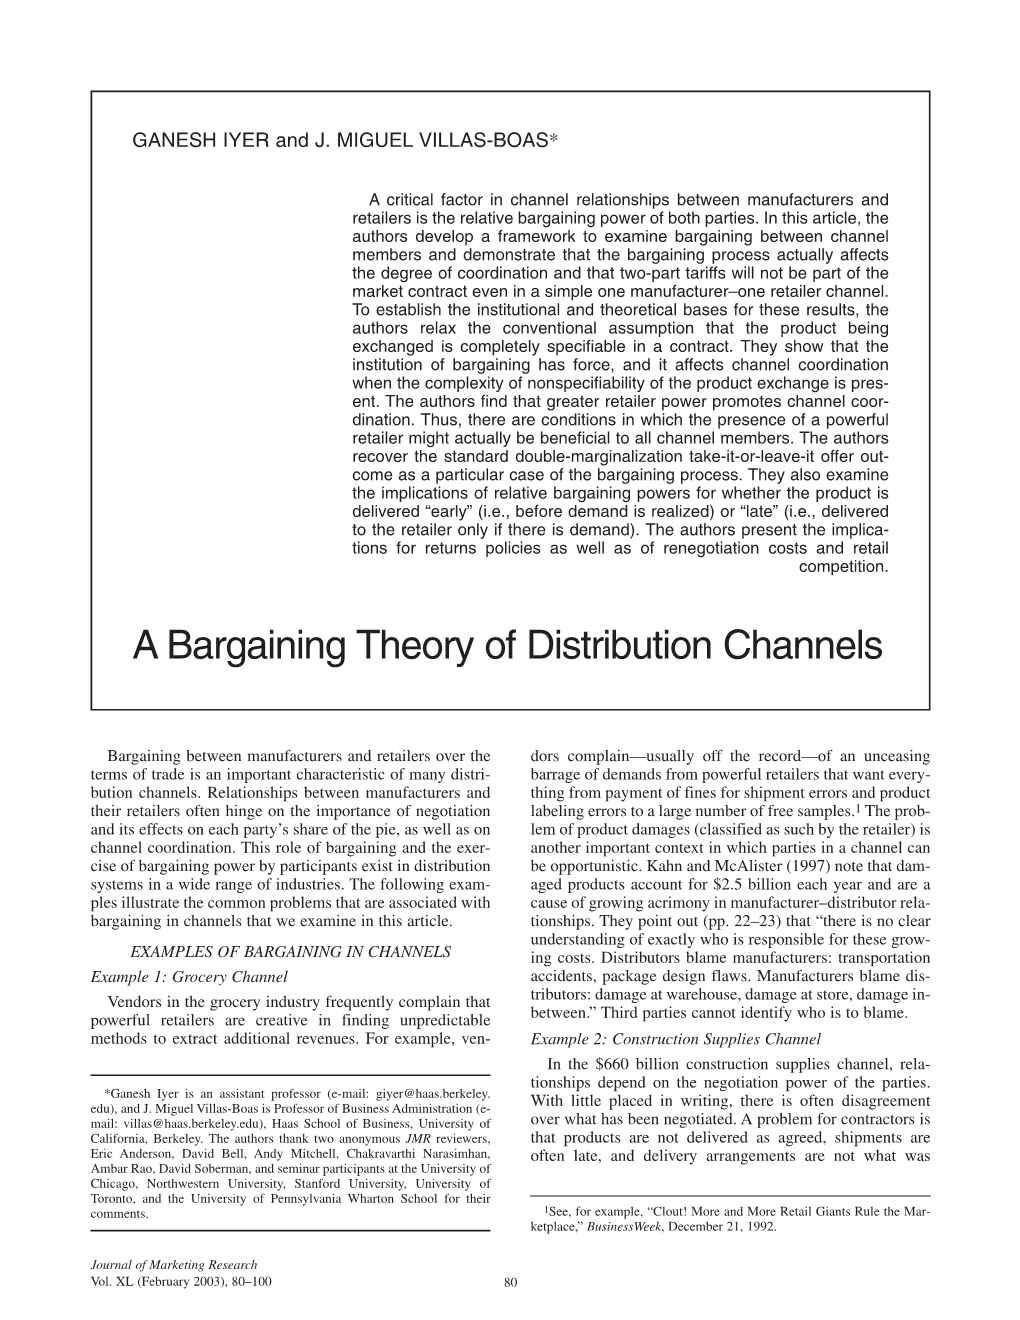 A Bargaining Theory of Distribution Channels